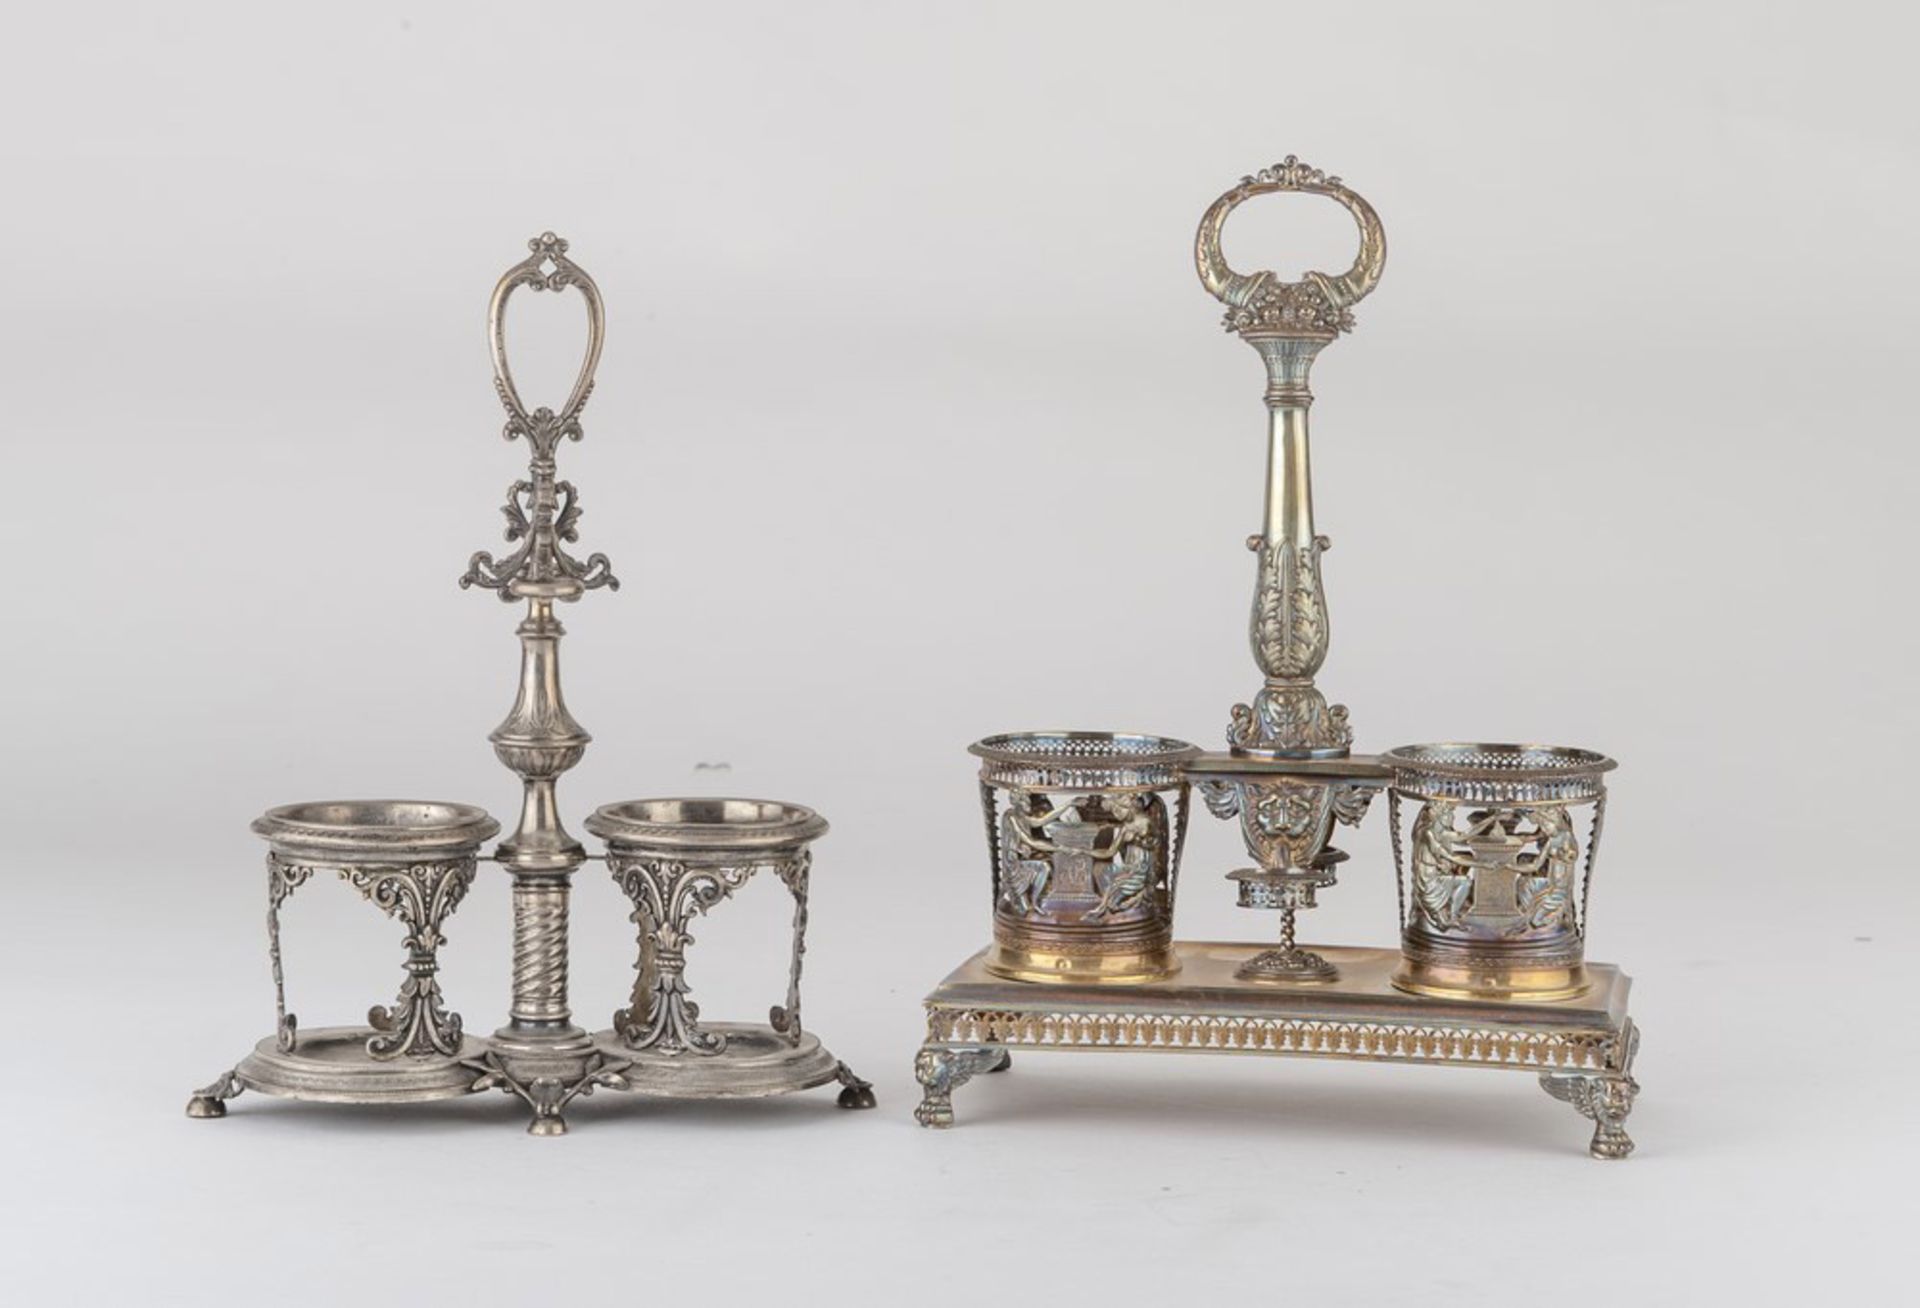 TWO SILVER OIL-CRUETS IN, PUNCH PARIS 1819/1838 with pierced basins, one of them with mythological